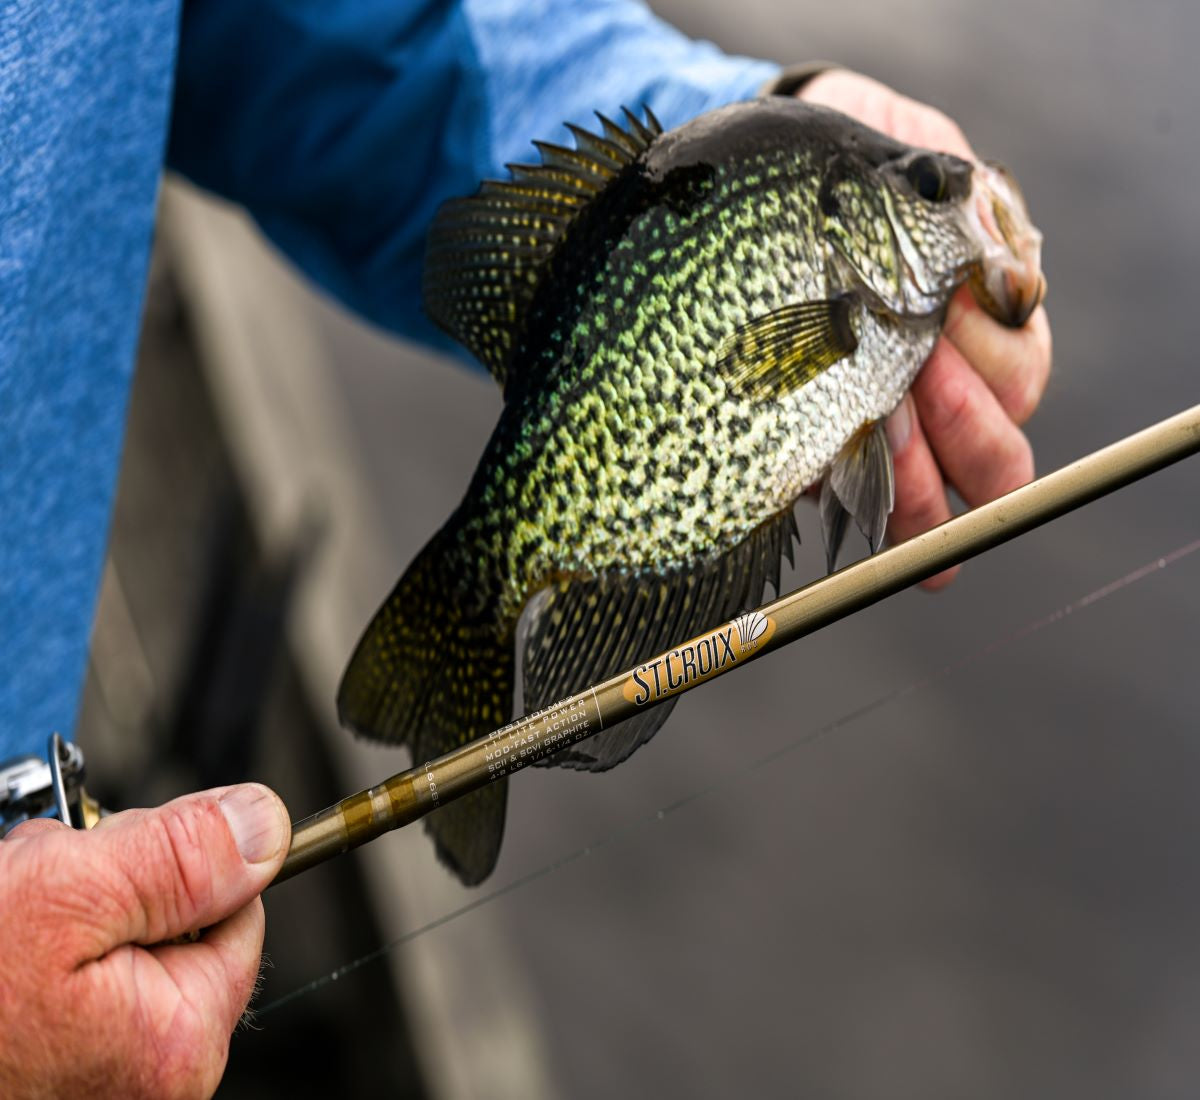 Panfishing With the St. Croix Avid Panfish 